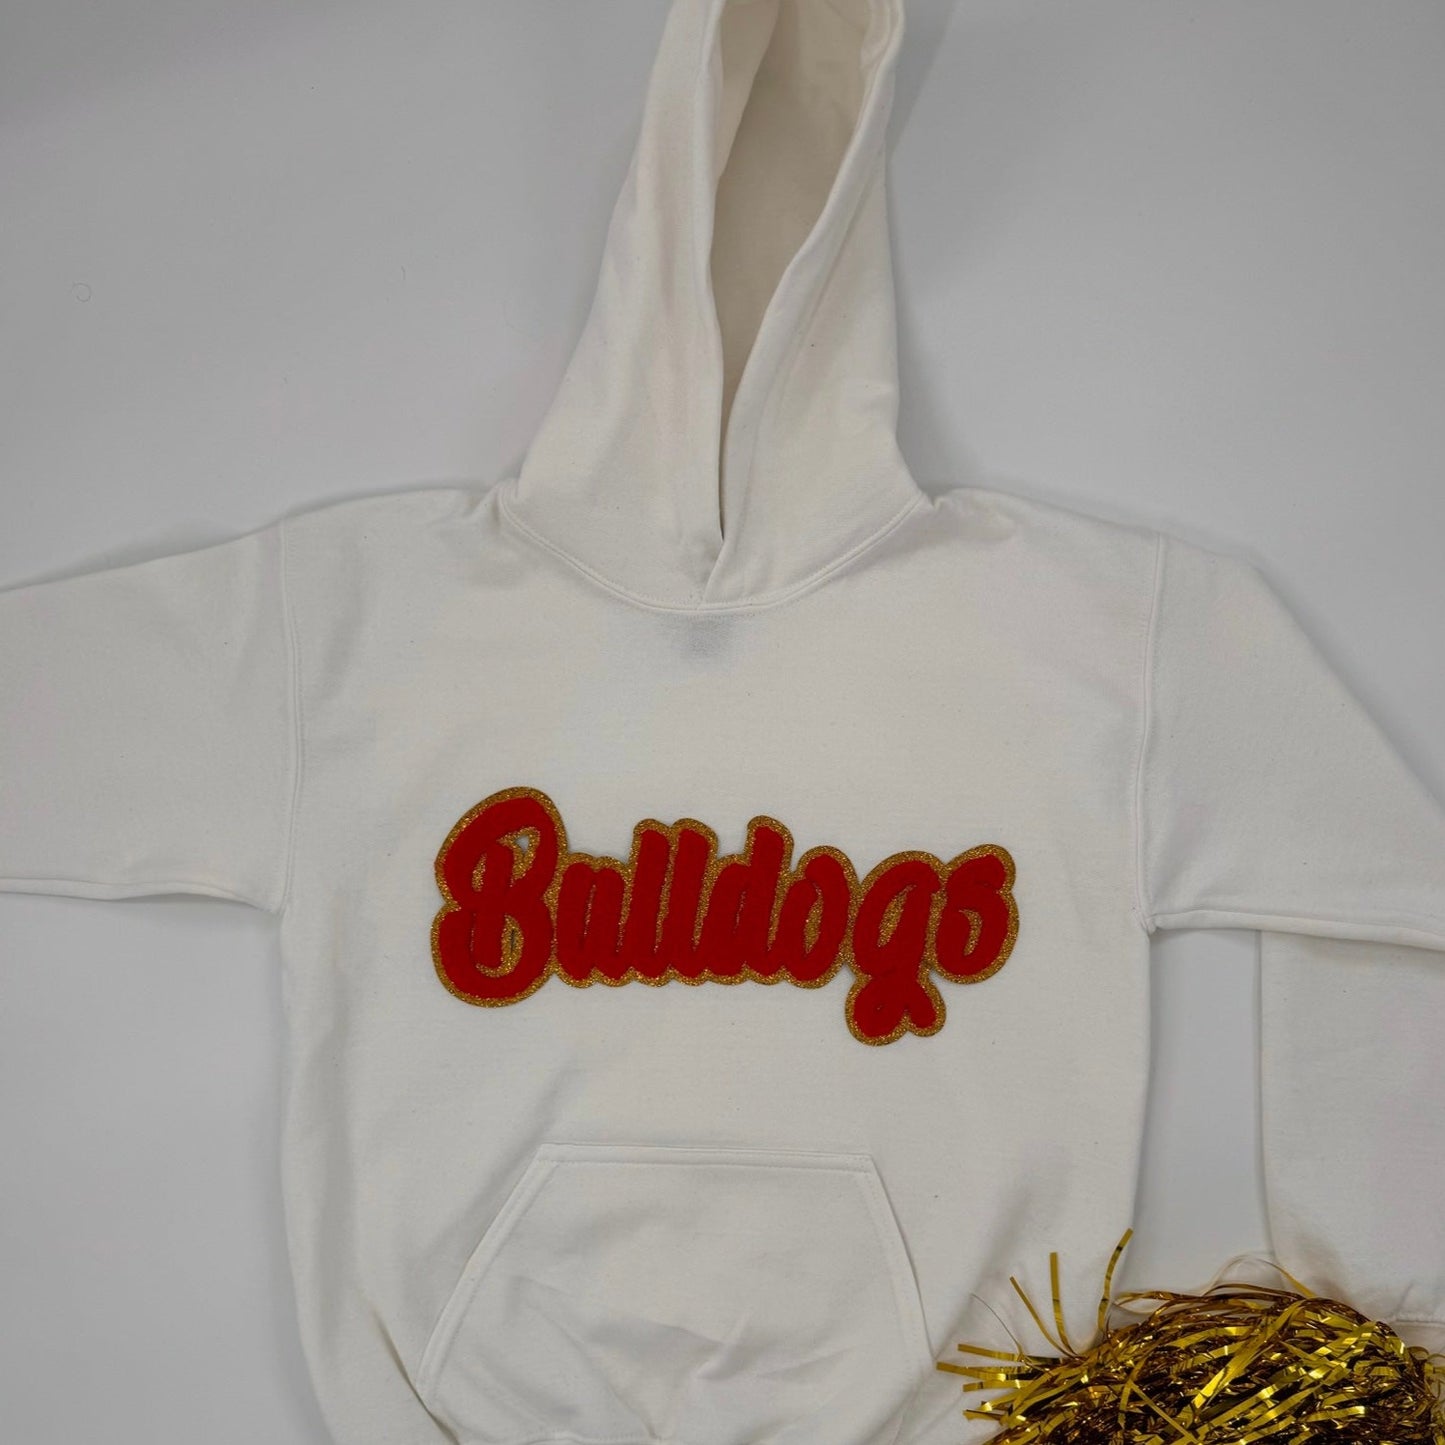 Bulldogs Chenille Patch Youth & Adult Hooded Sweatshirt